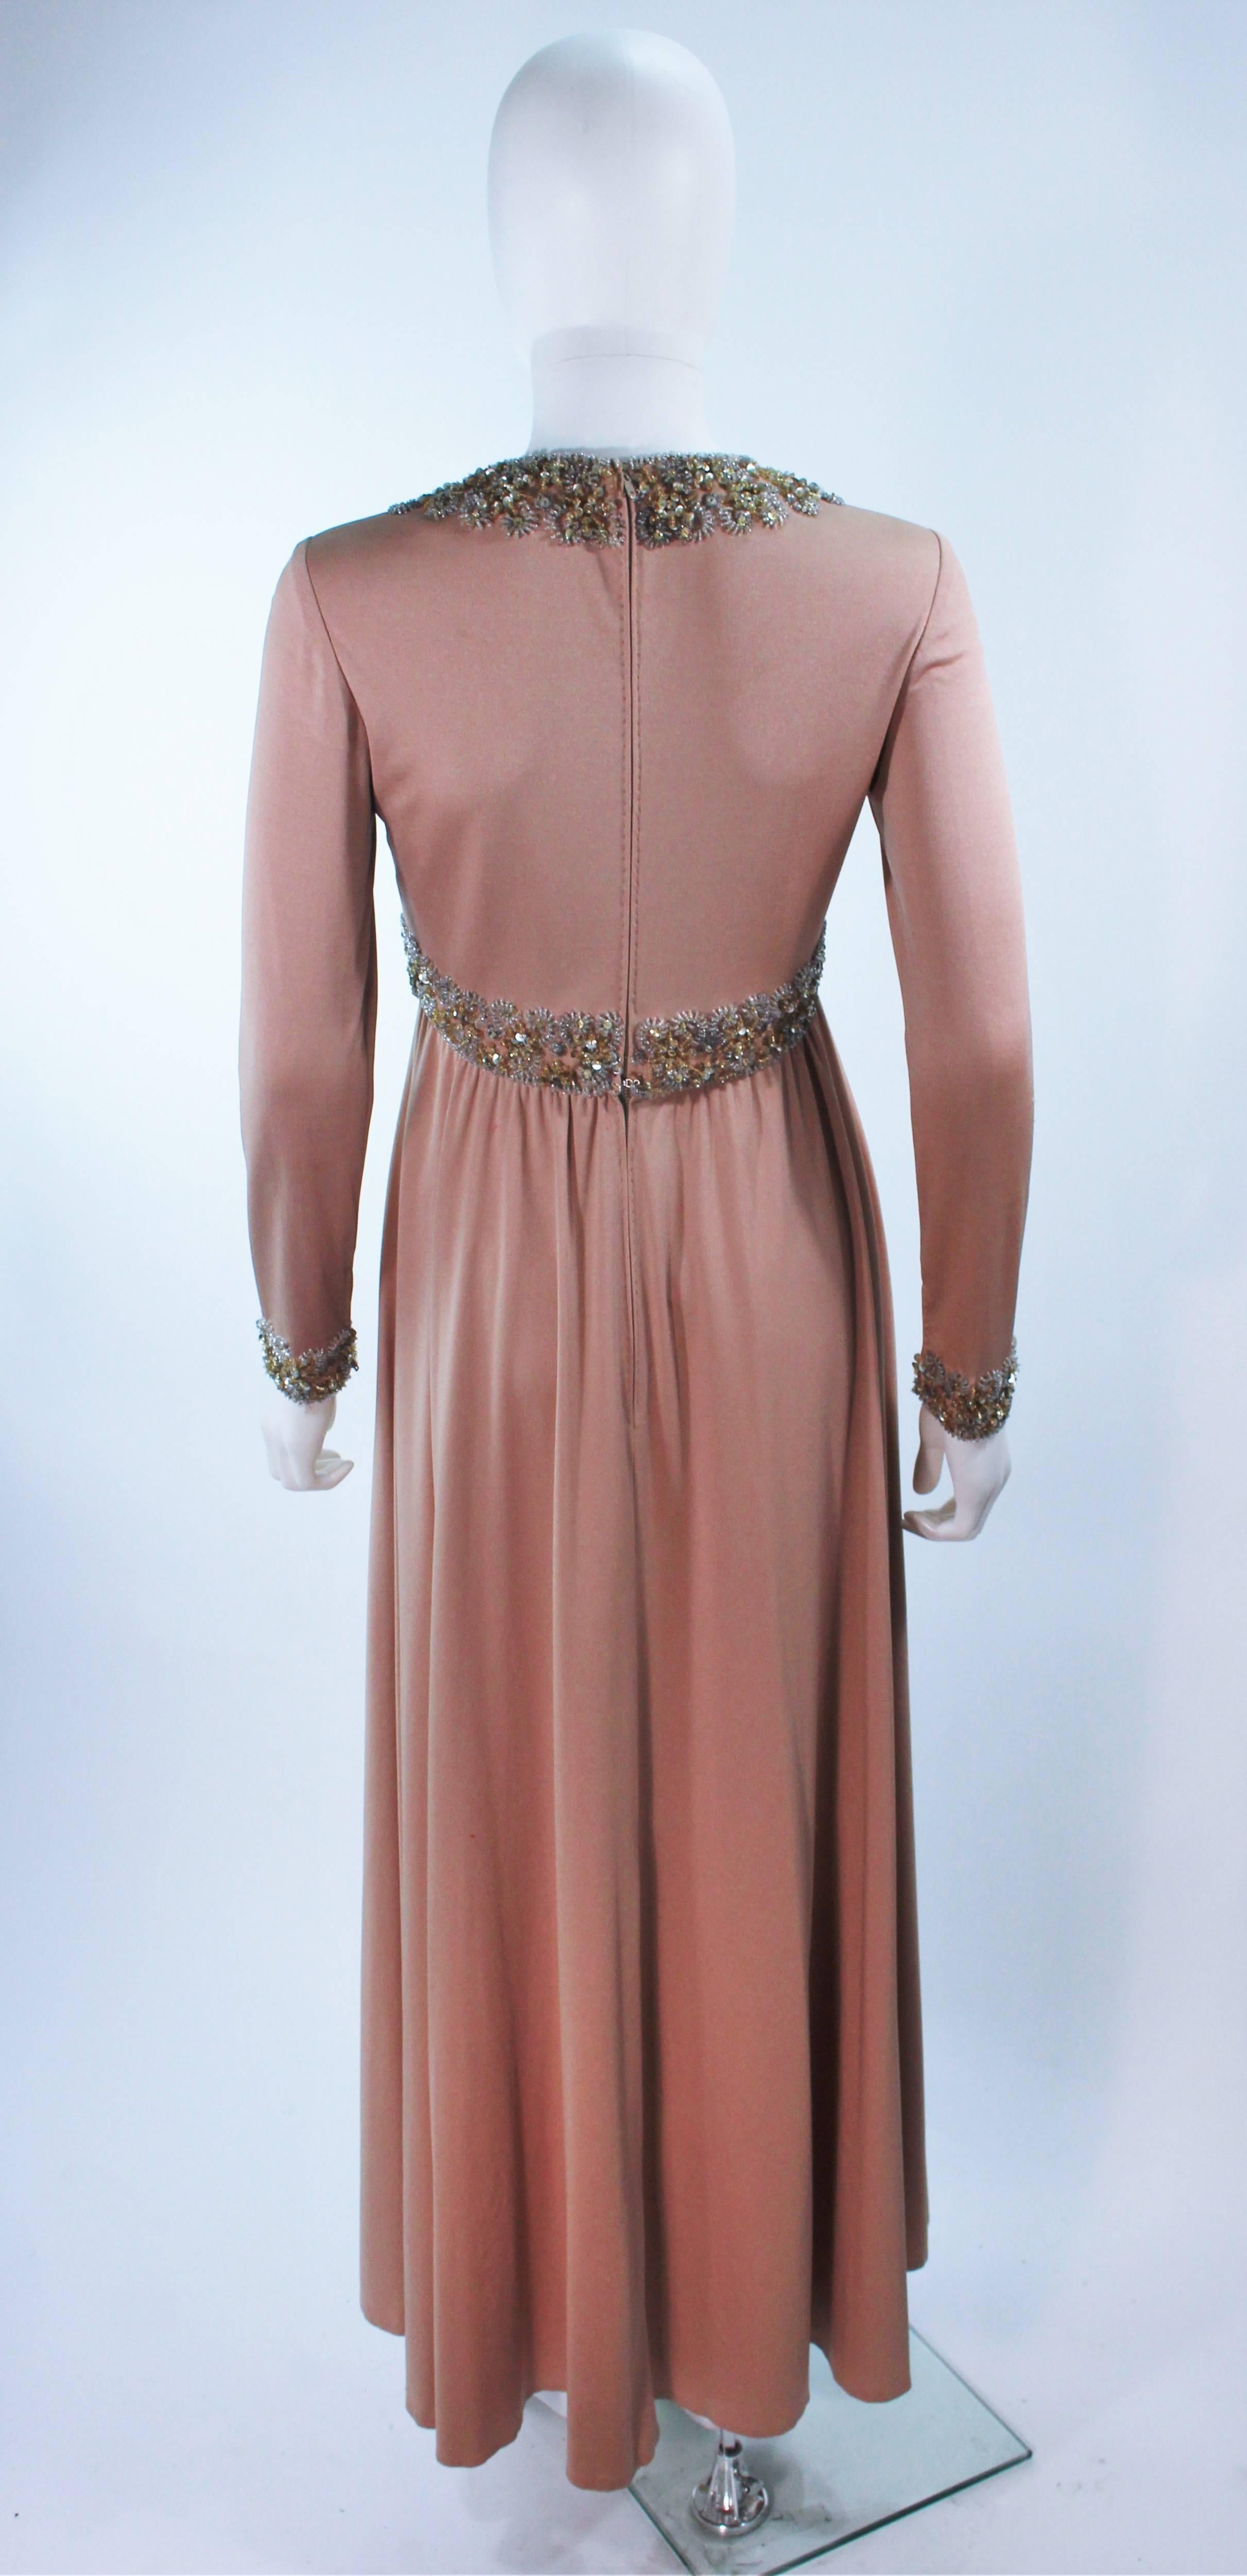 VICTORIA ROYAL Toffee Jersey Embellished Gown Size 6 8 For Sale 3